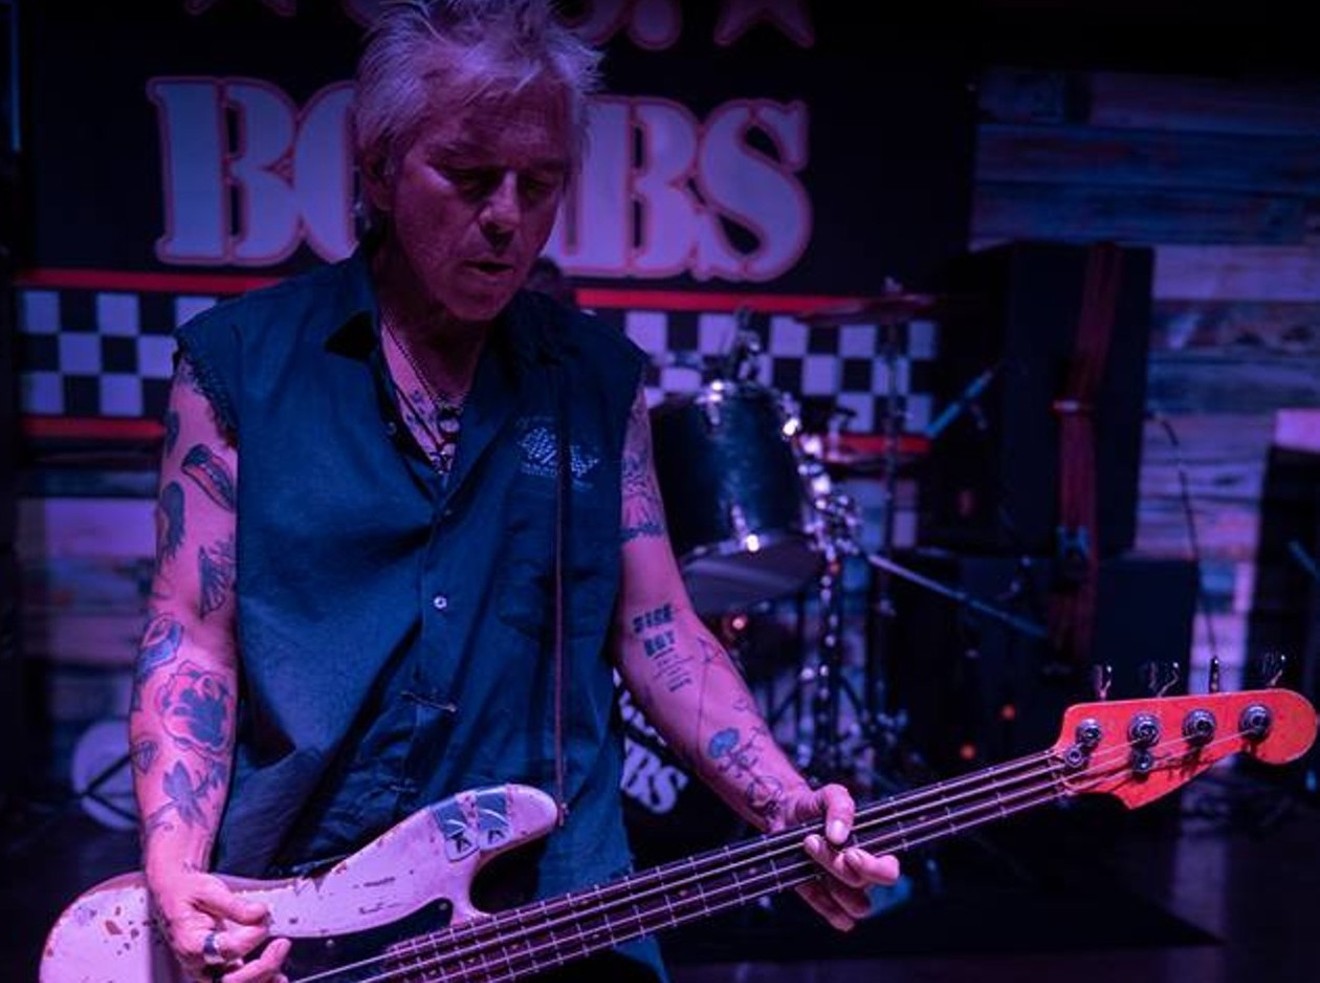 Steve "Stevie D" Davis rocking out on his prize bass at a U.S. Bombs show in 2018.